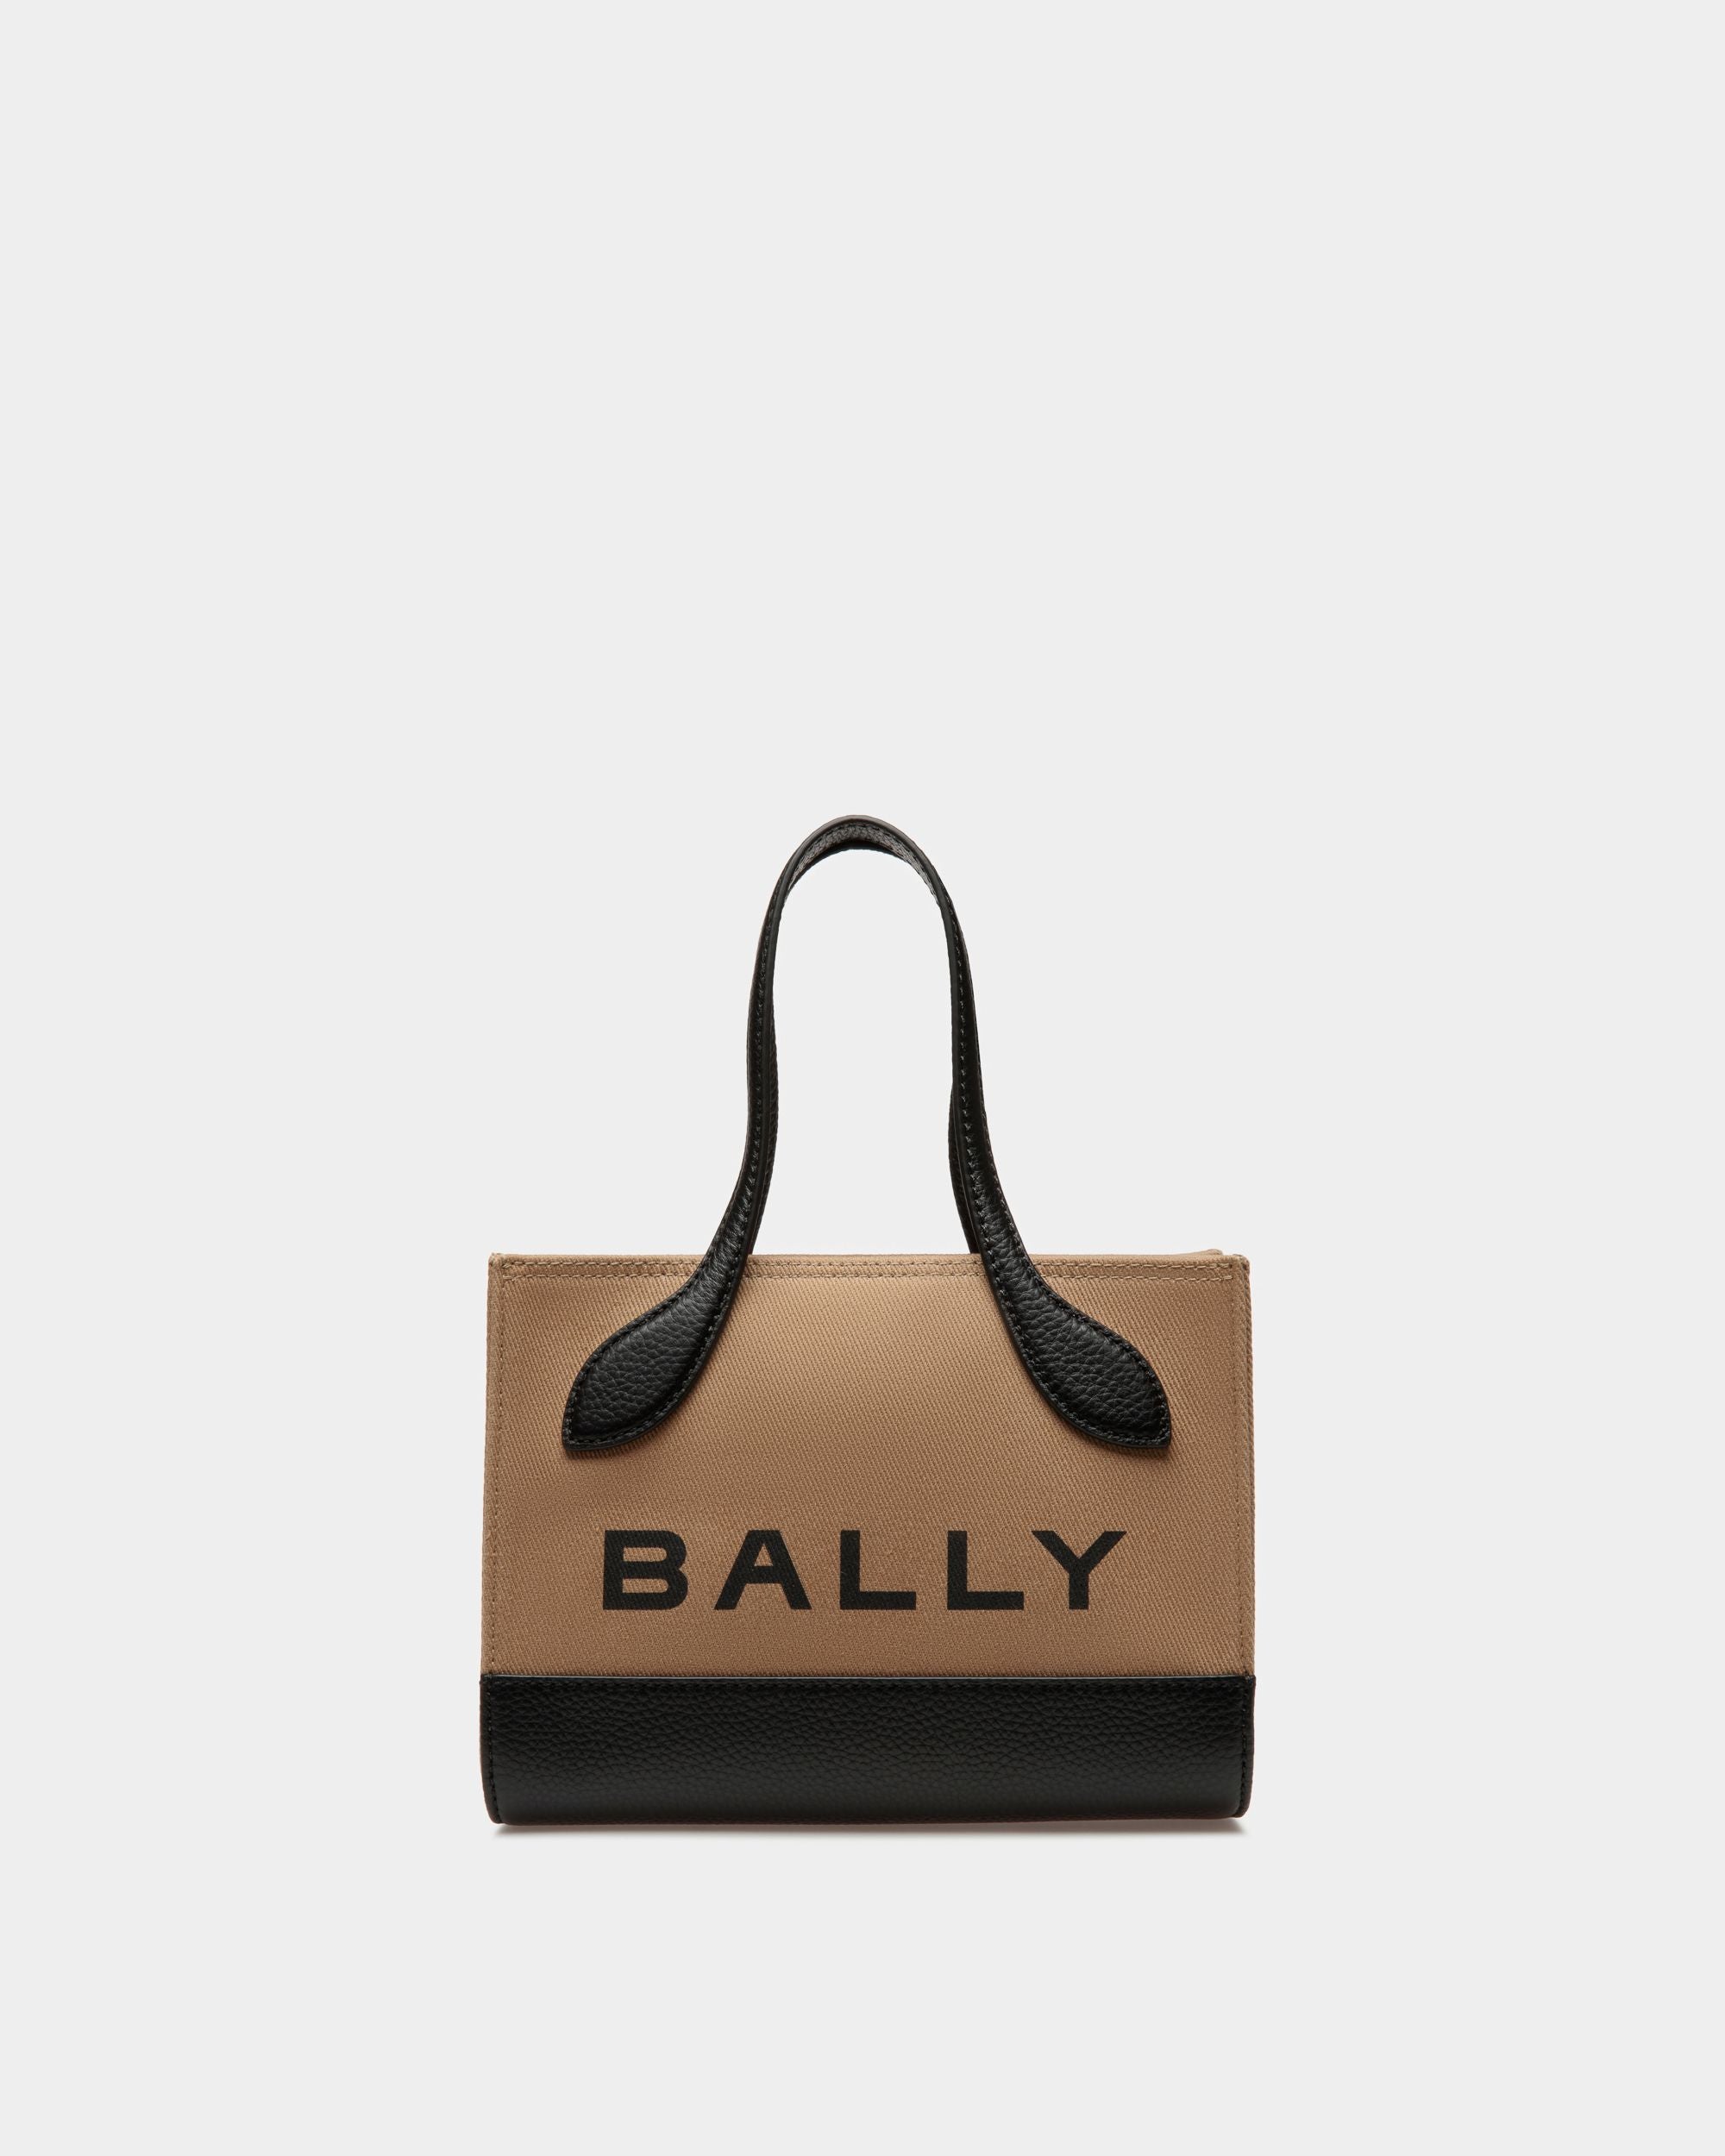 Bar Keep On Extra Small | Women's Minibag | Sand And Black Fabric | Bally | Still Life Front